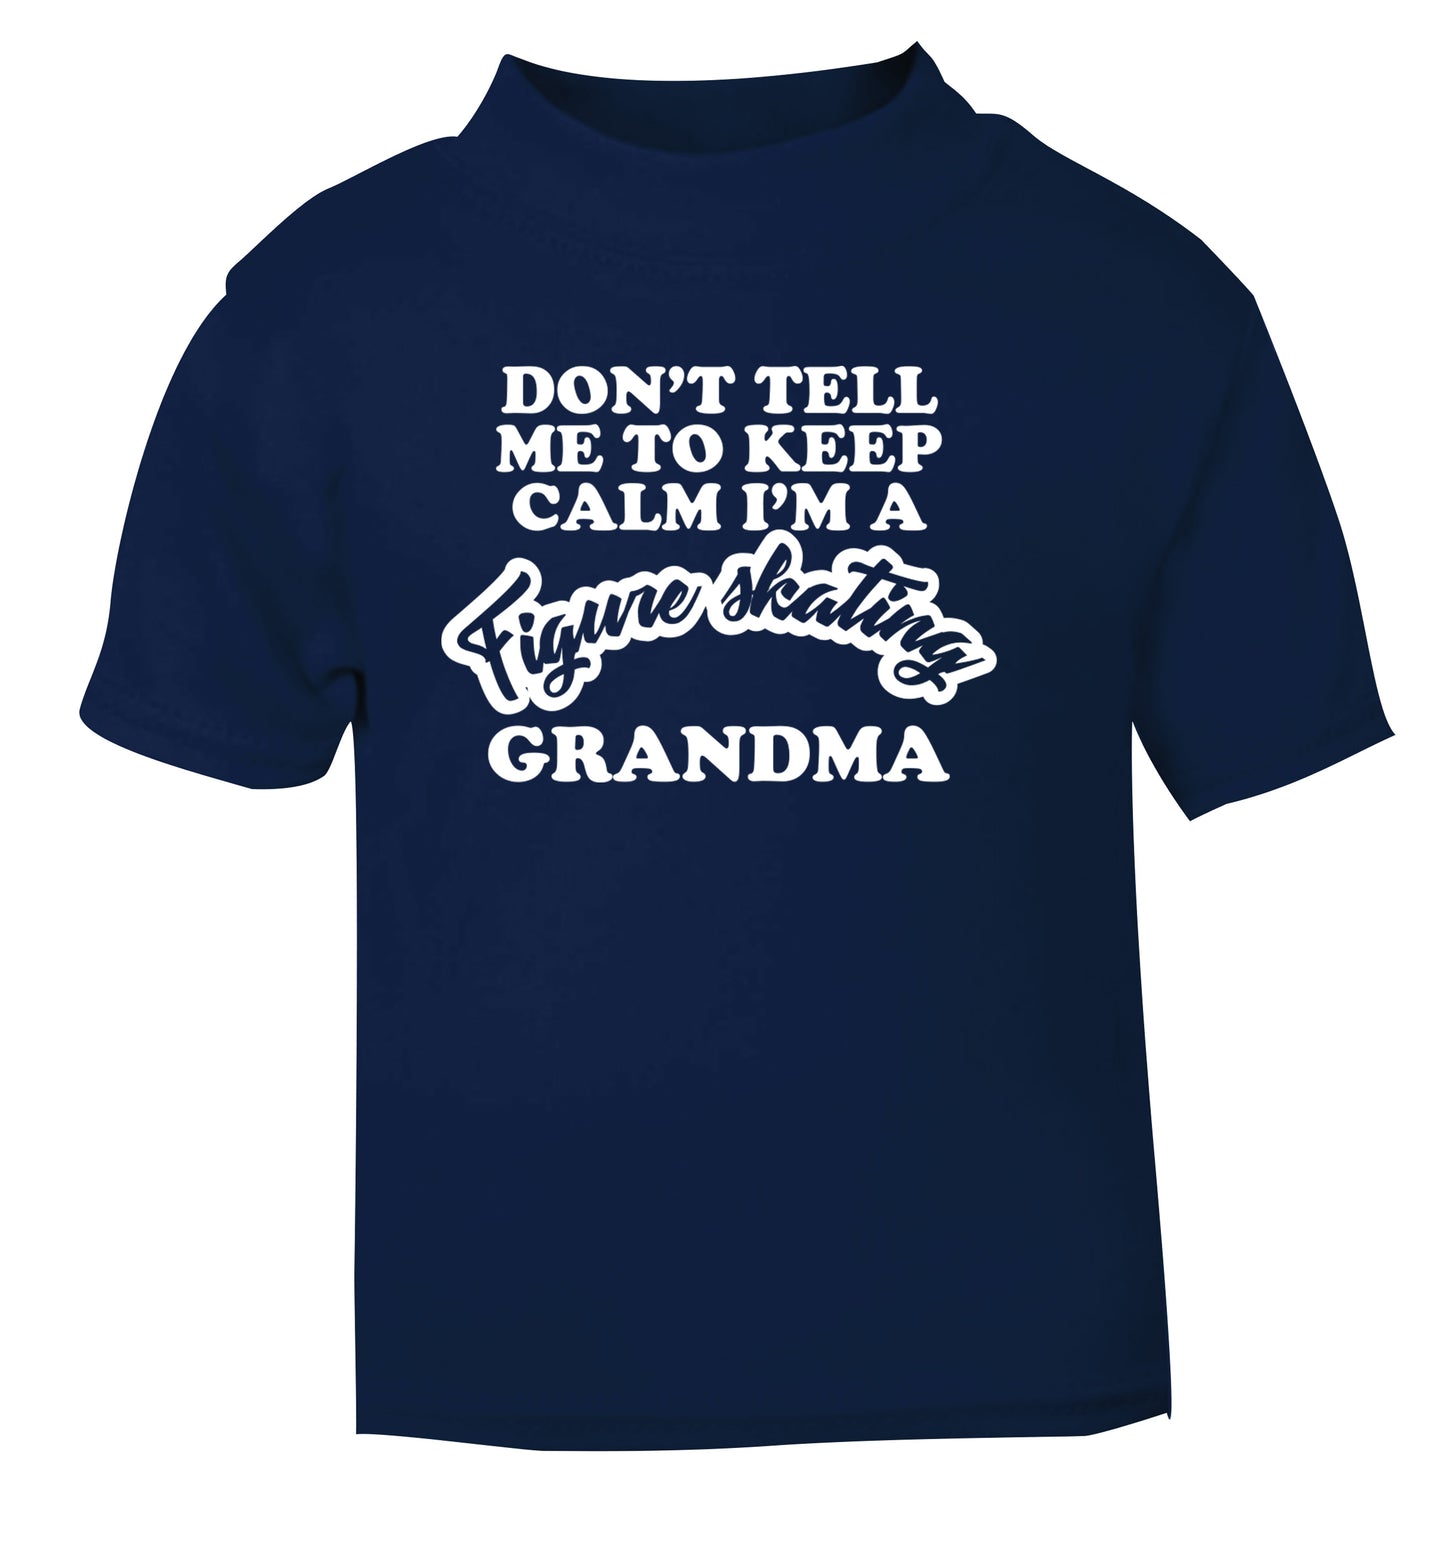 Don't tell me to keep calm I'm a figure skating grandma navy Baby Toddler Tshirt 2 Years